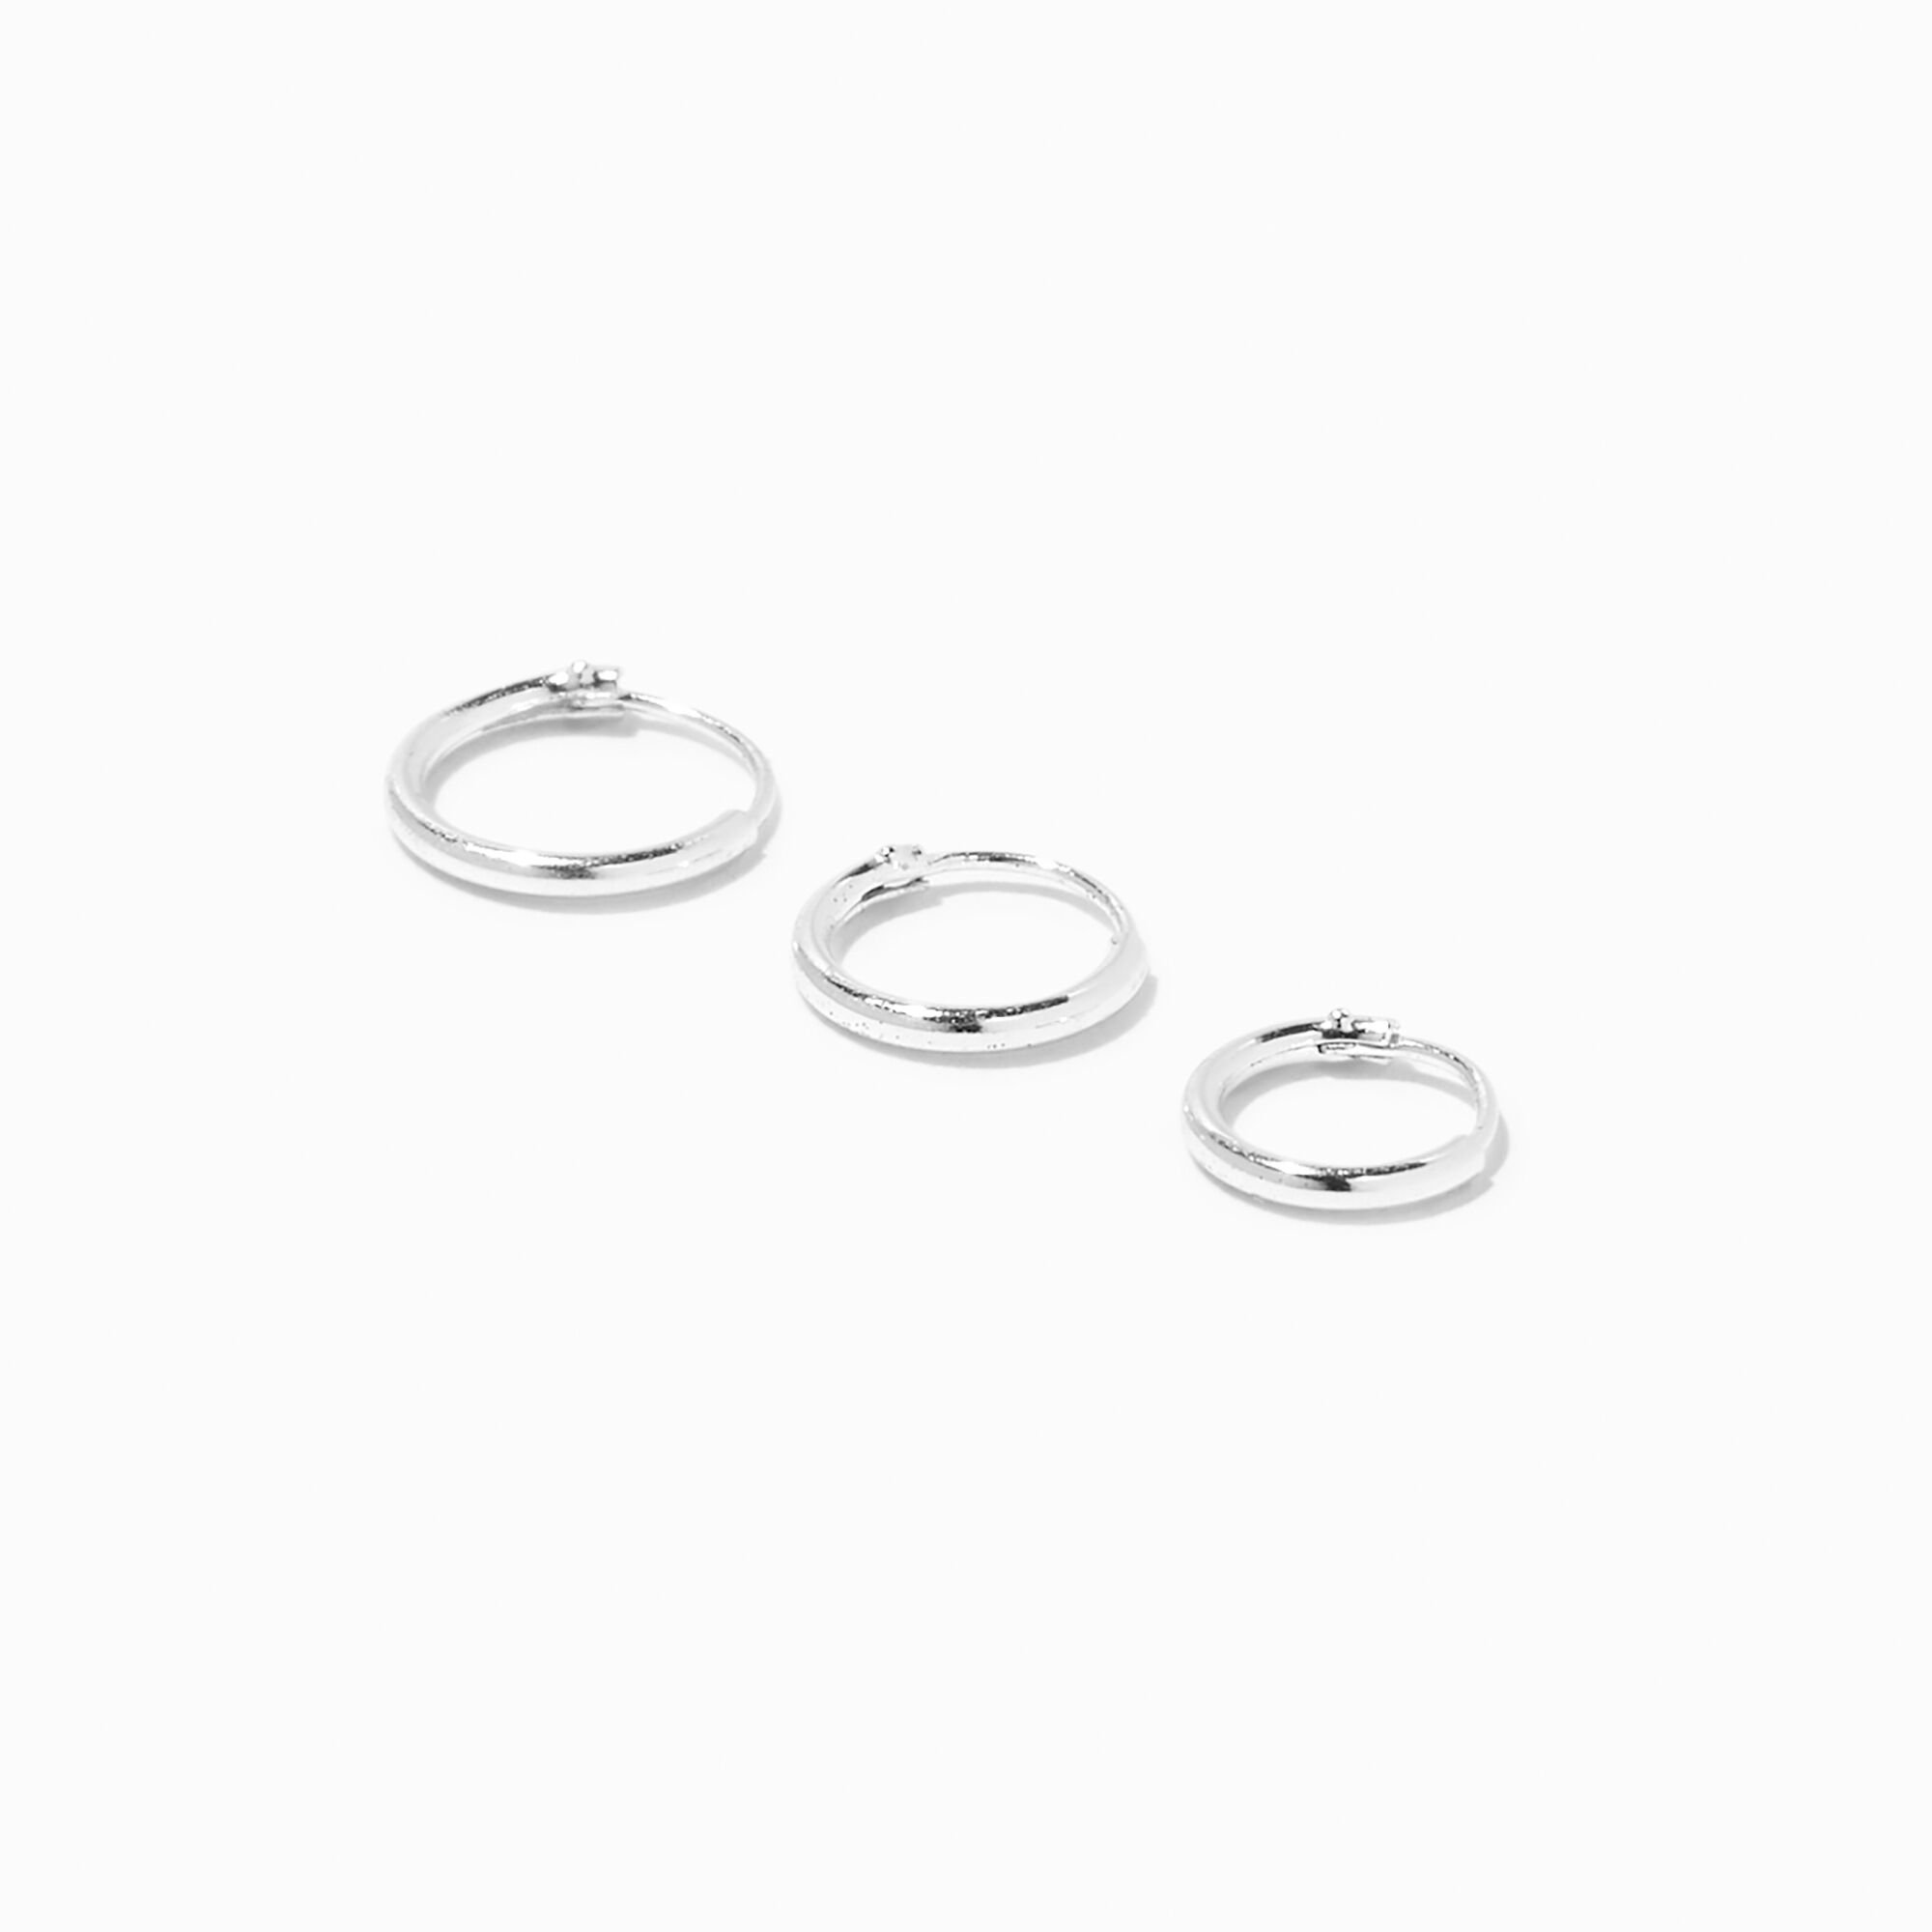 View Claires 22G Helix Endless Hoop Earrings 3 Pack Silver information